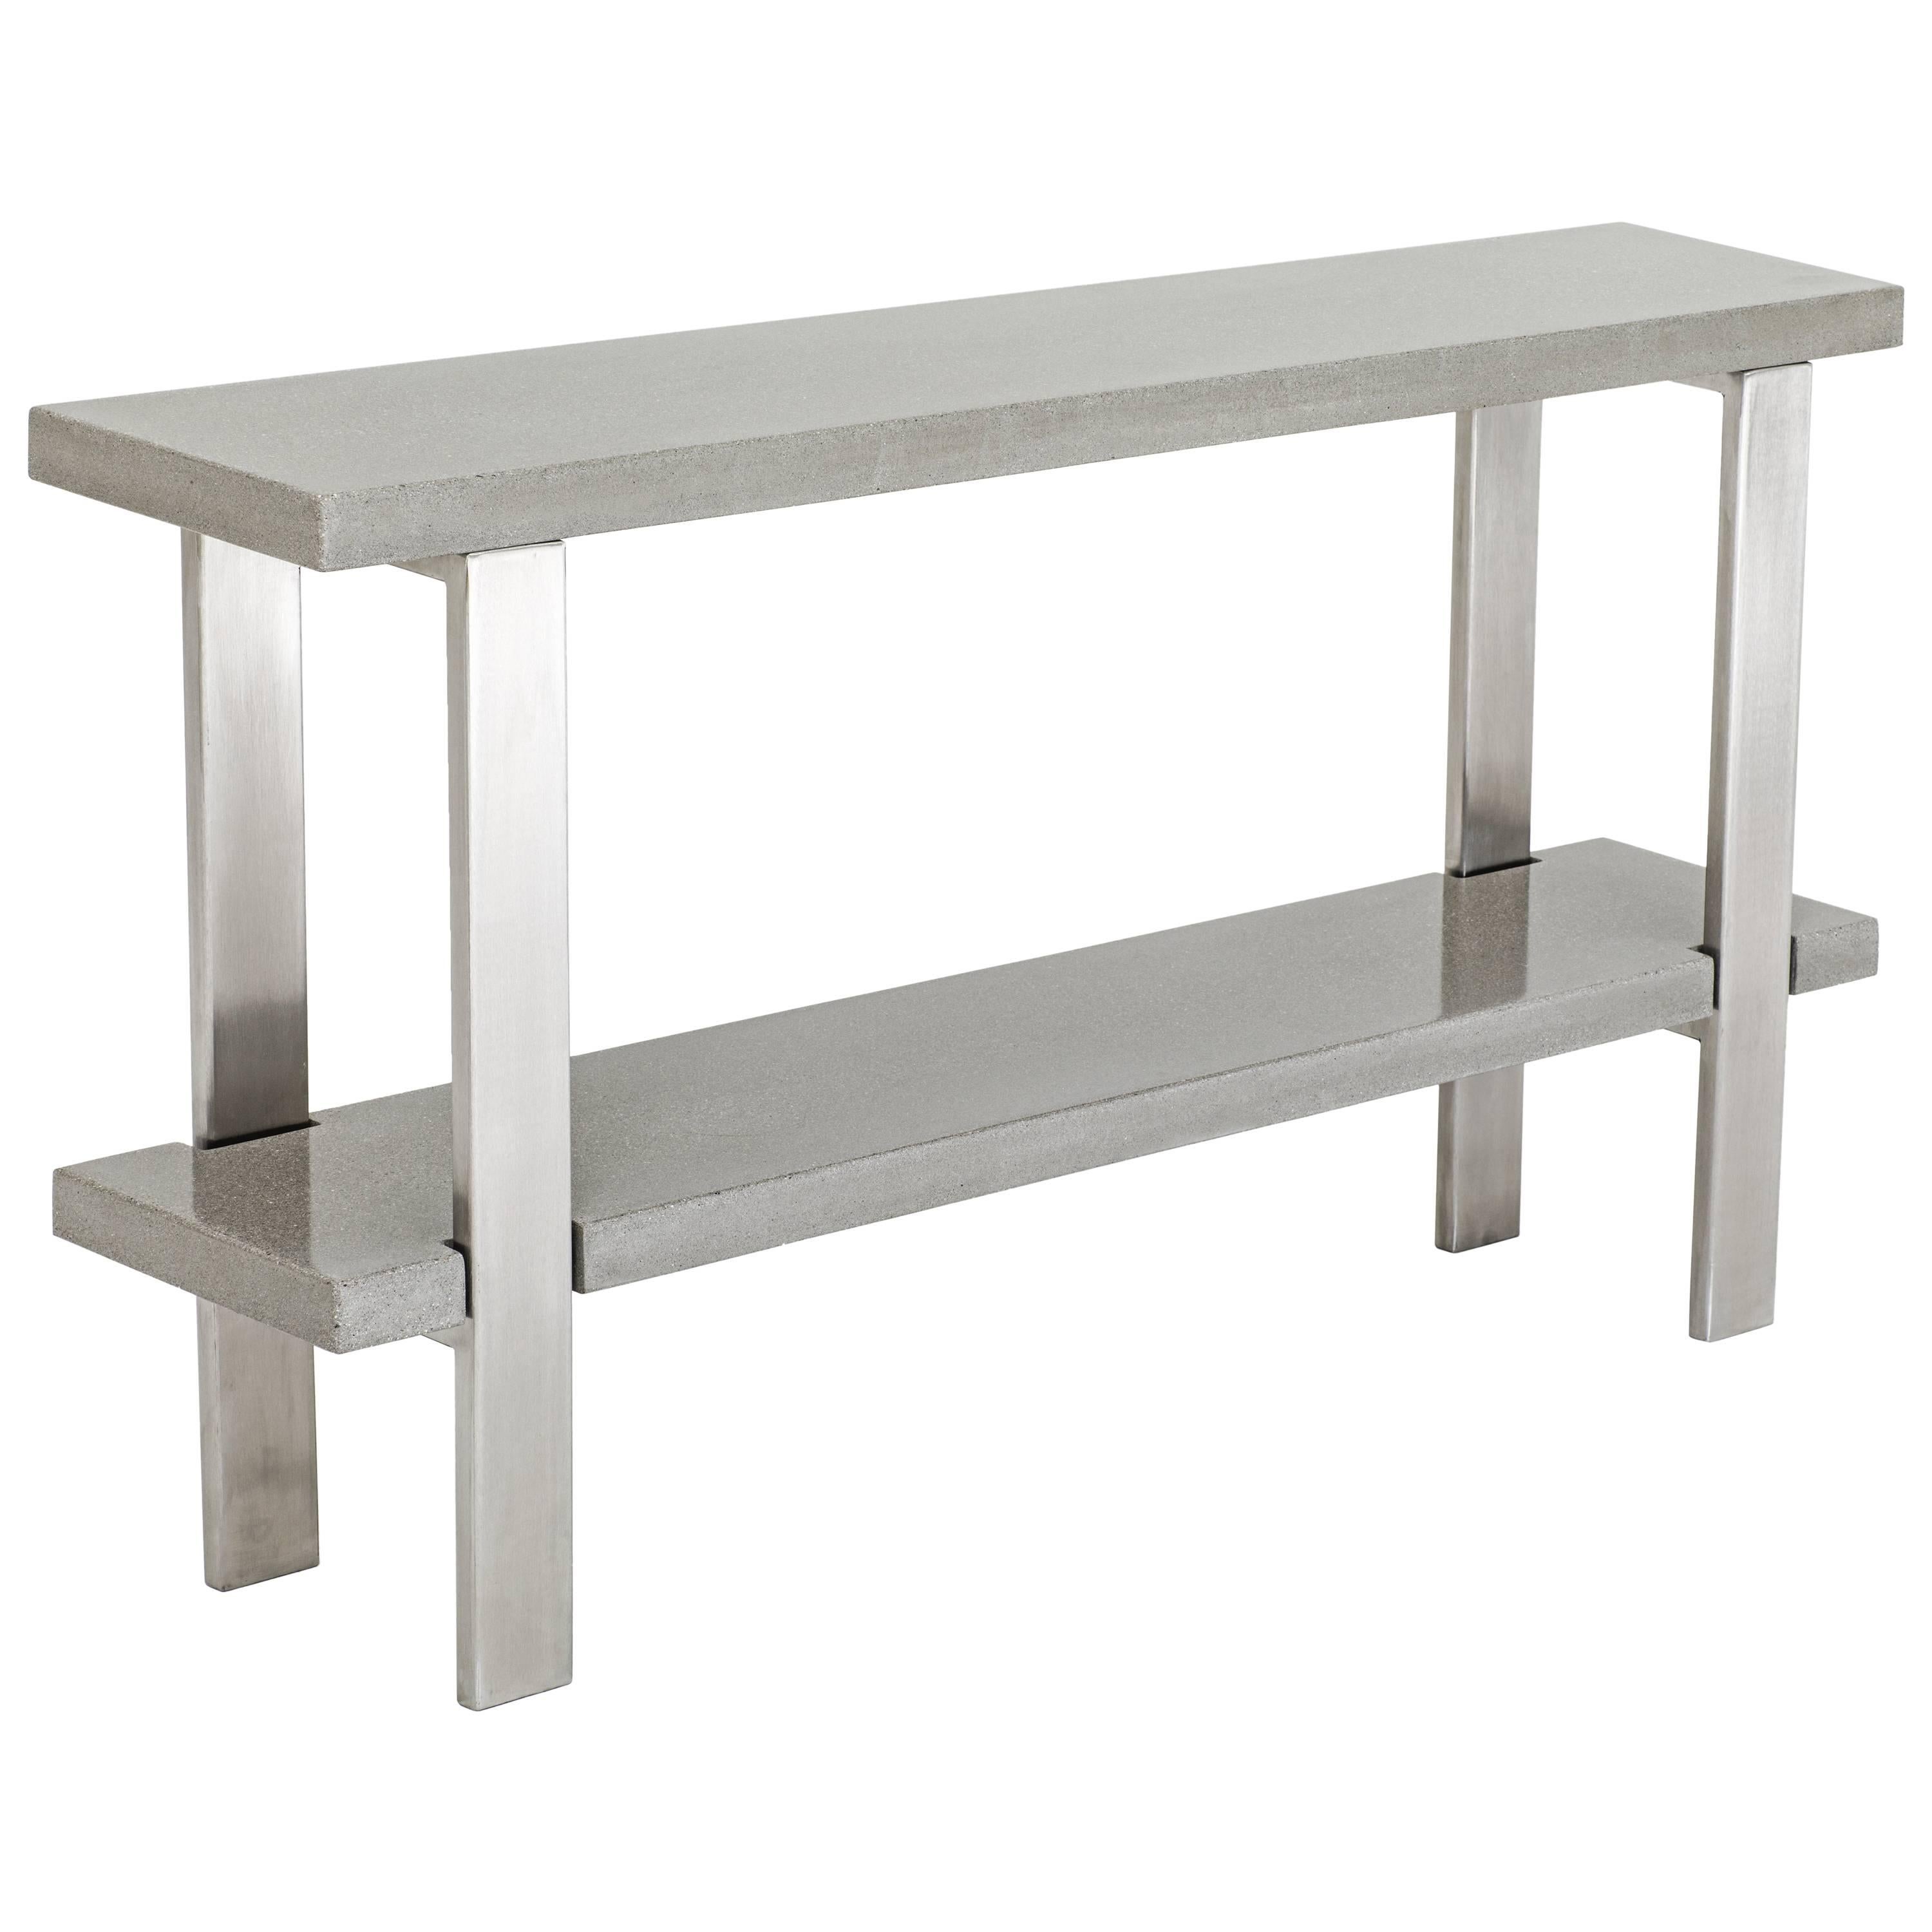 James de Wulf Industrial Console Table, Concrete and Brushed Stainless Steel